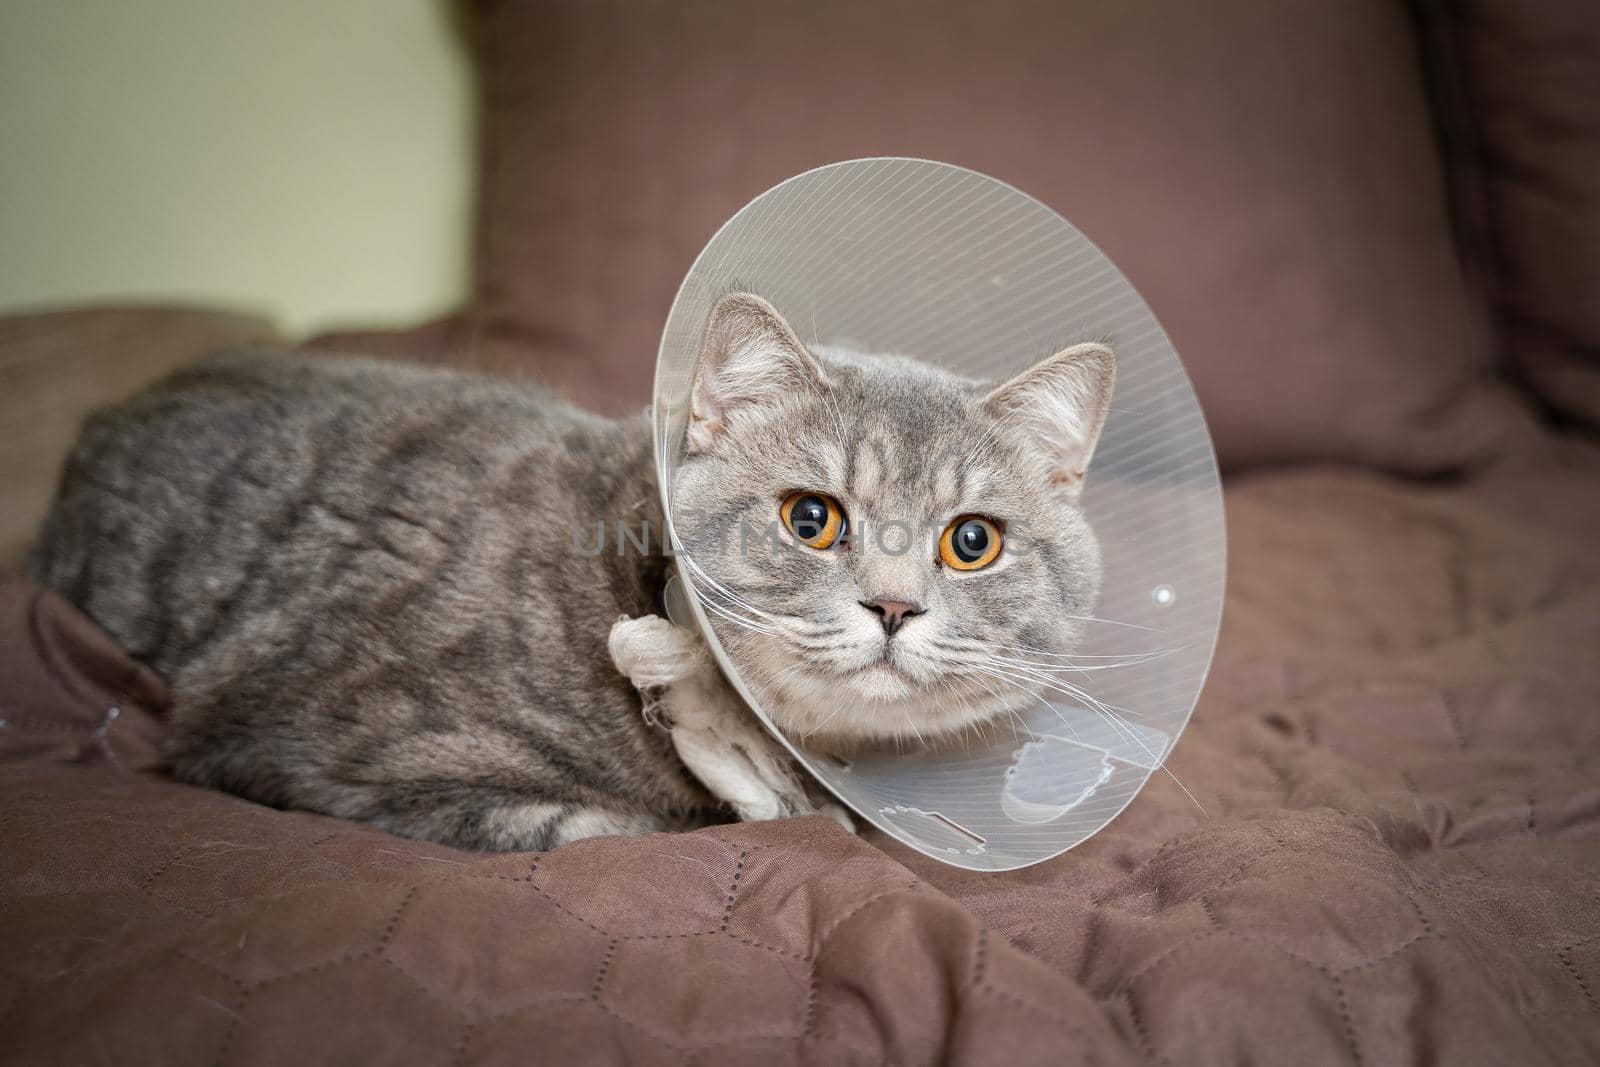 Tired cat gray Scottish Straight breed resting with veterinairy cone after surgery at home on the couch. Animal healthcare concept. After surgery cat's recovery in or E-Collar. Elizabethan Collar by Tomashevska